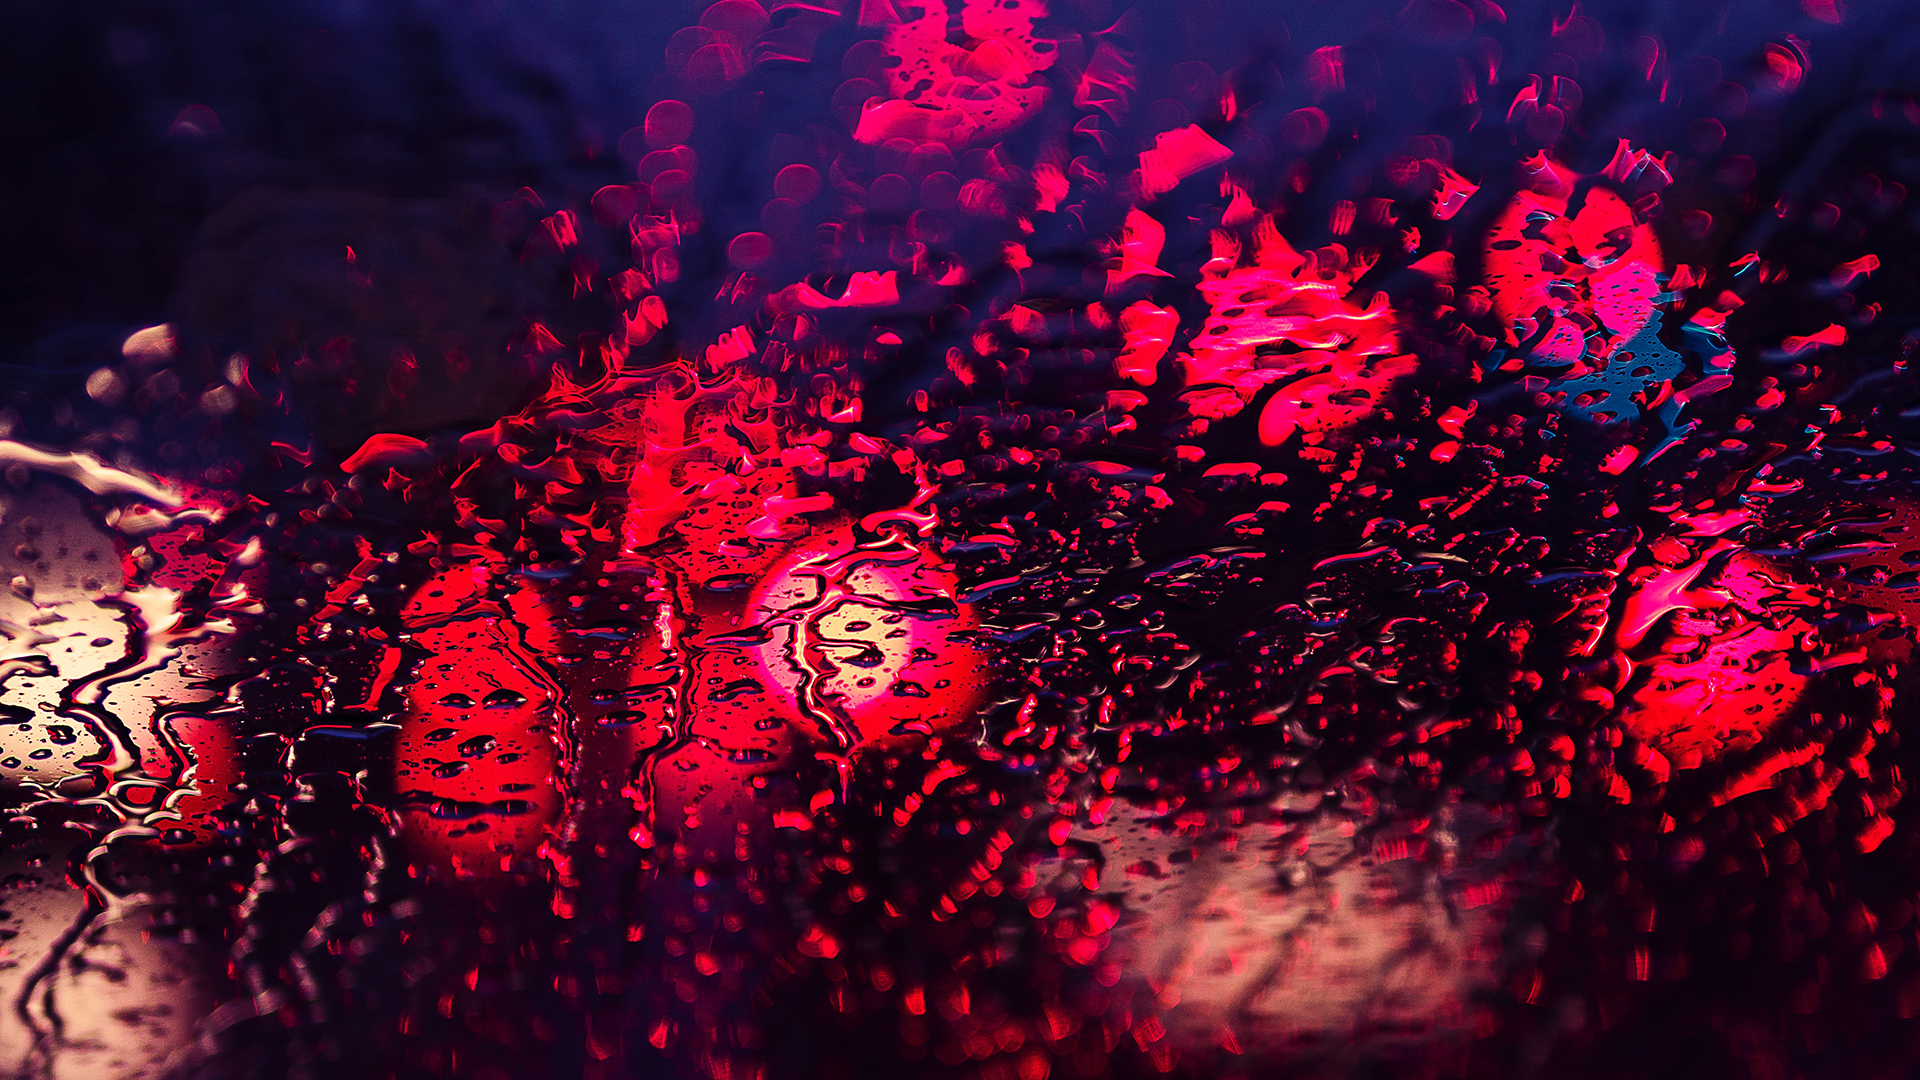 red, Lights, Rain, Water on glass, Water drops Wallpaper HD / Desktop and Mobile Background